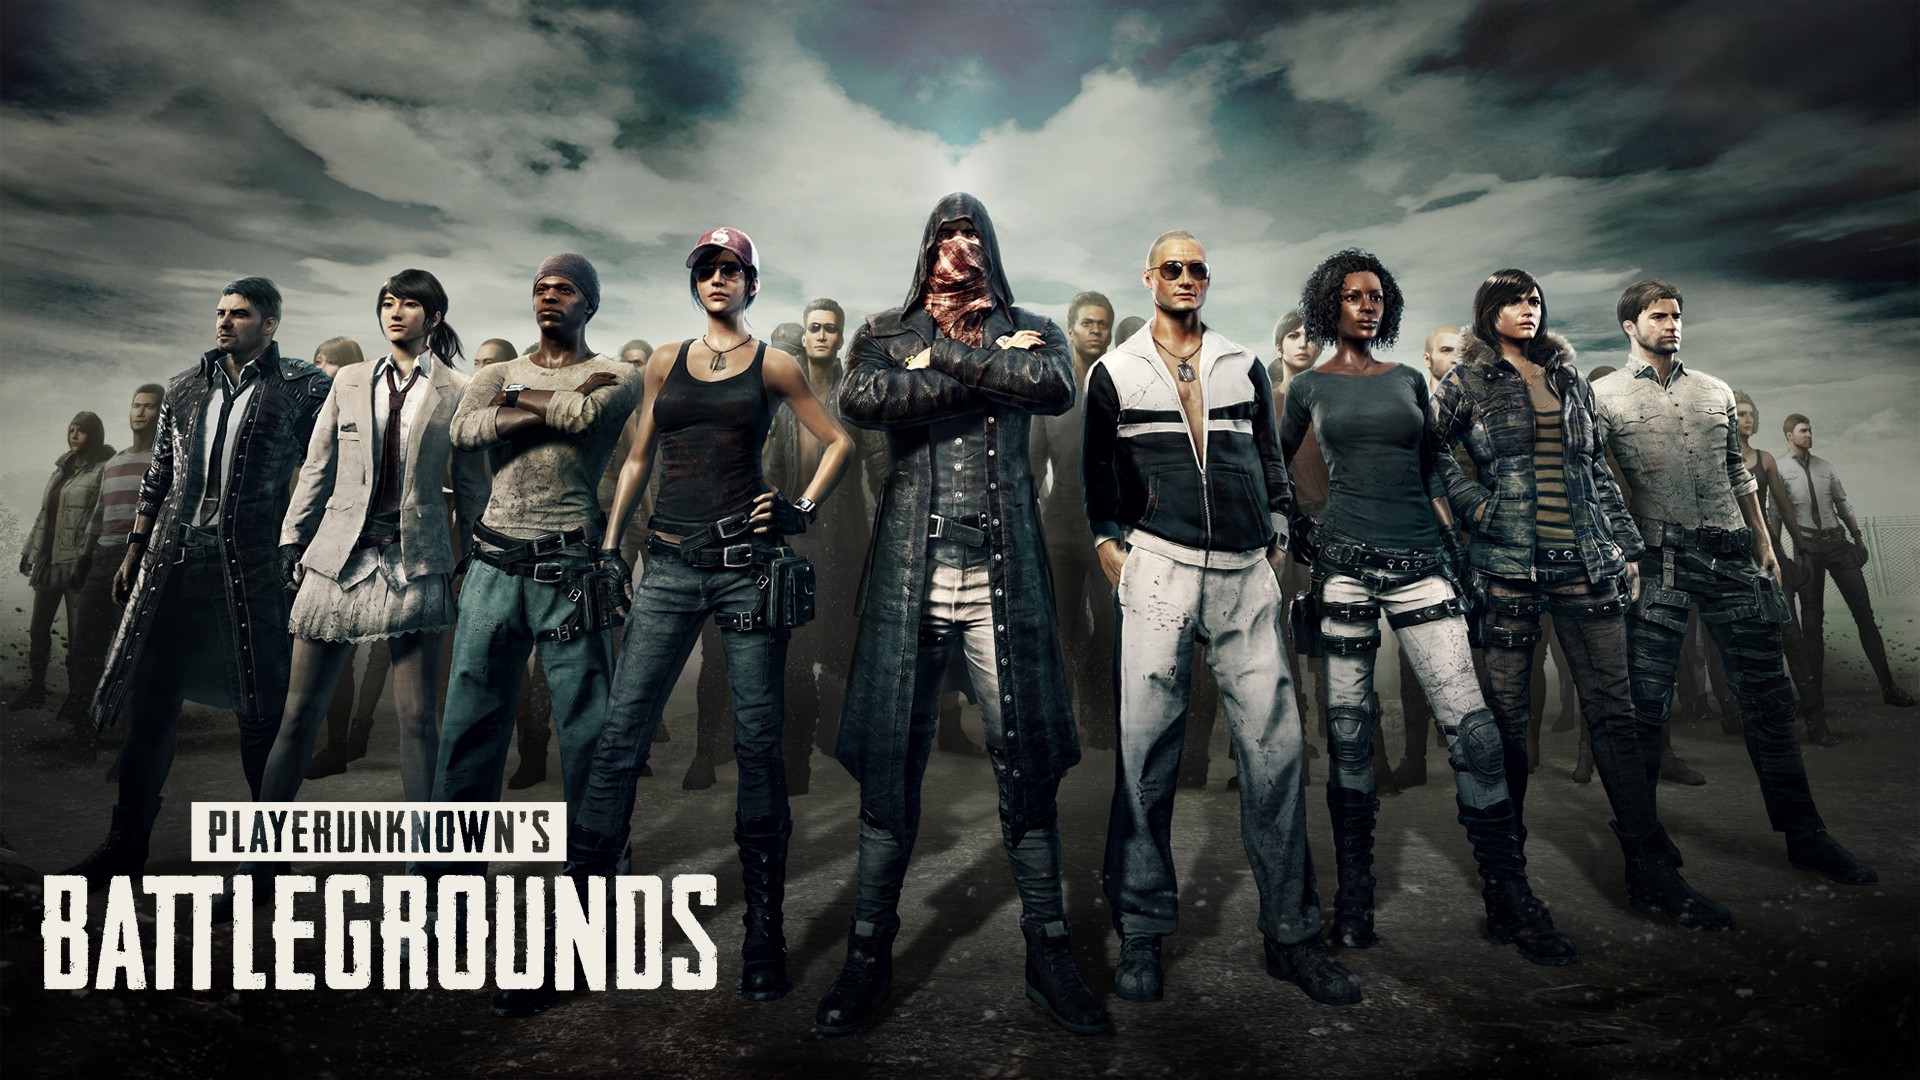 Wallpaper PUBG New Update Desktop with image resolution 1920x1080 pixel. You can use this wallpaper as background for your desktop Computer Screensavers, Android or iPhone smartphones